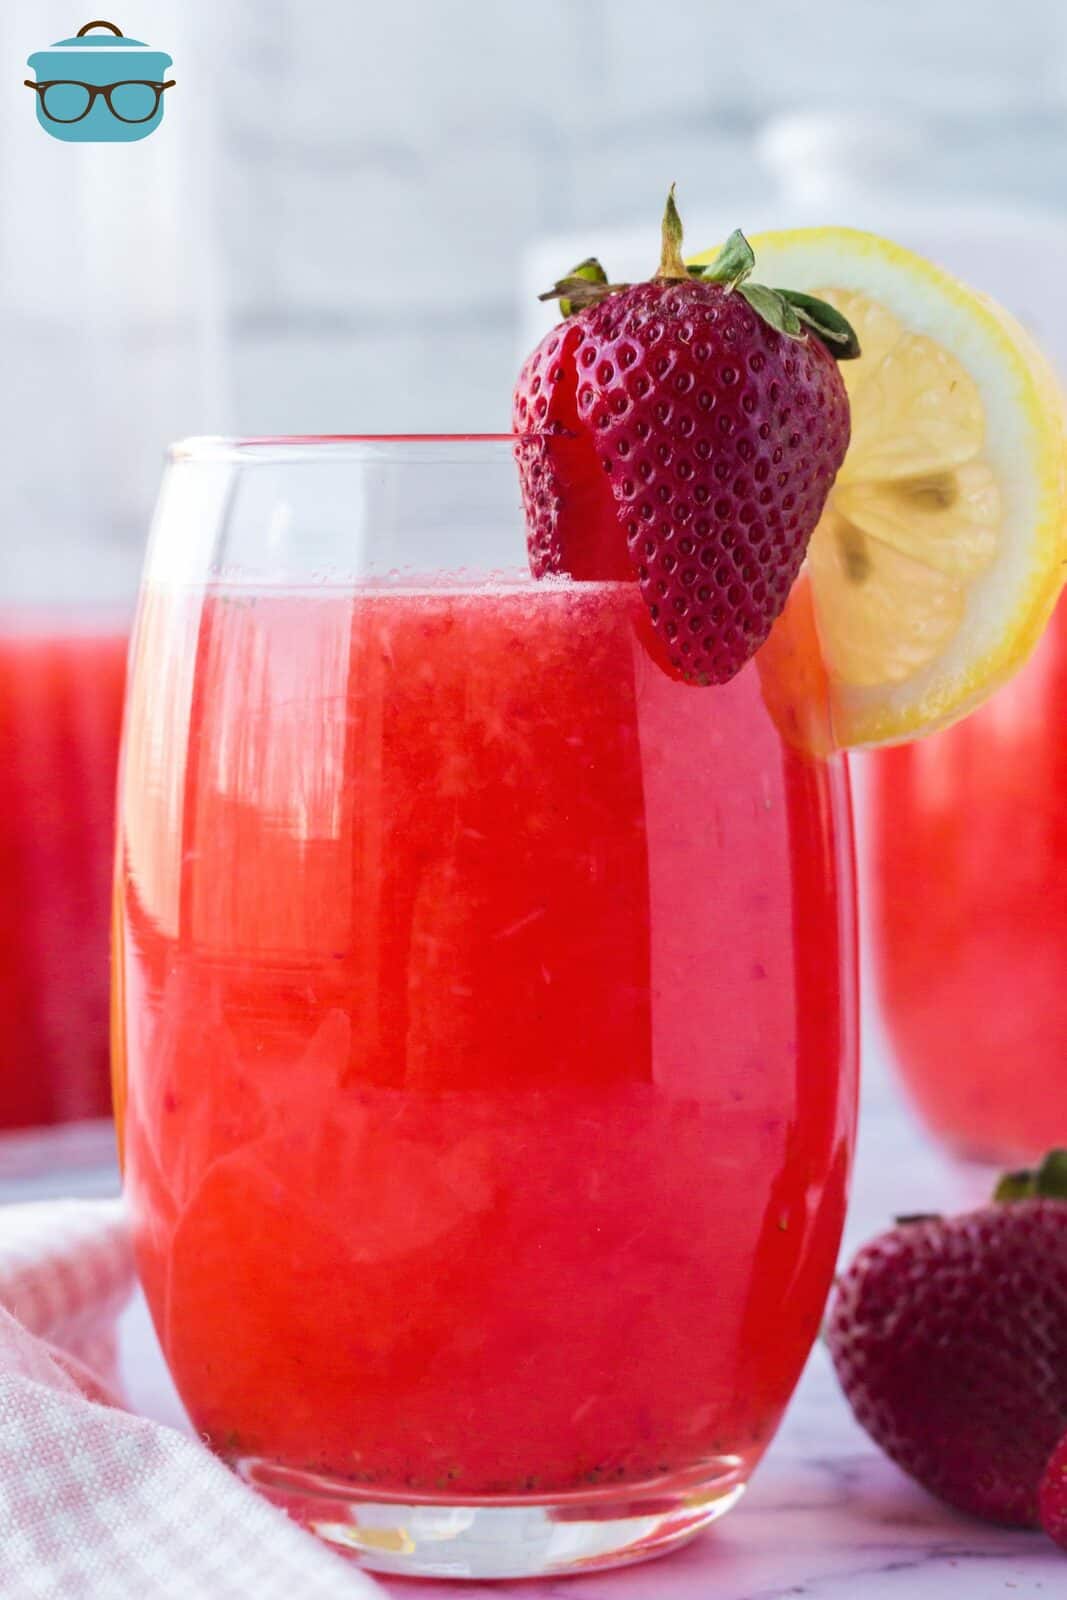 Strawberry Lemonade in glass garnished with strawberry and lemon slice.